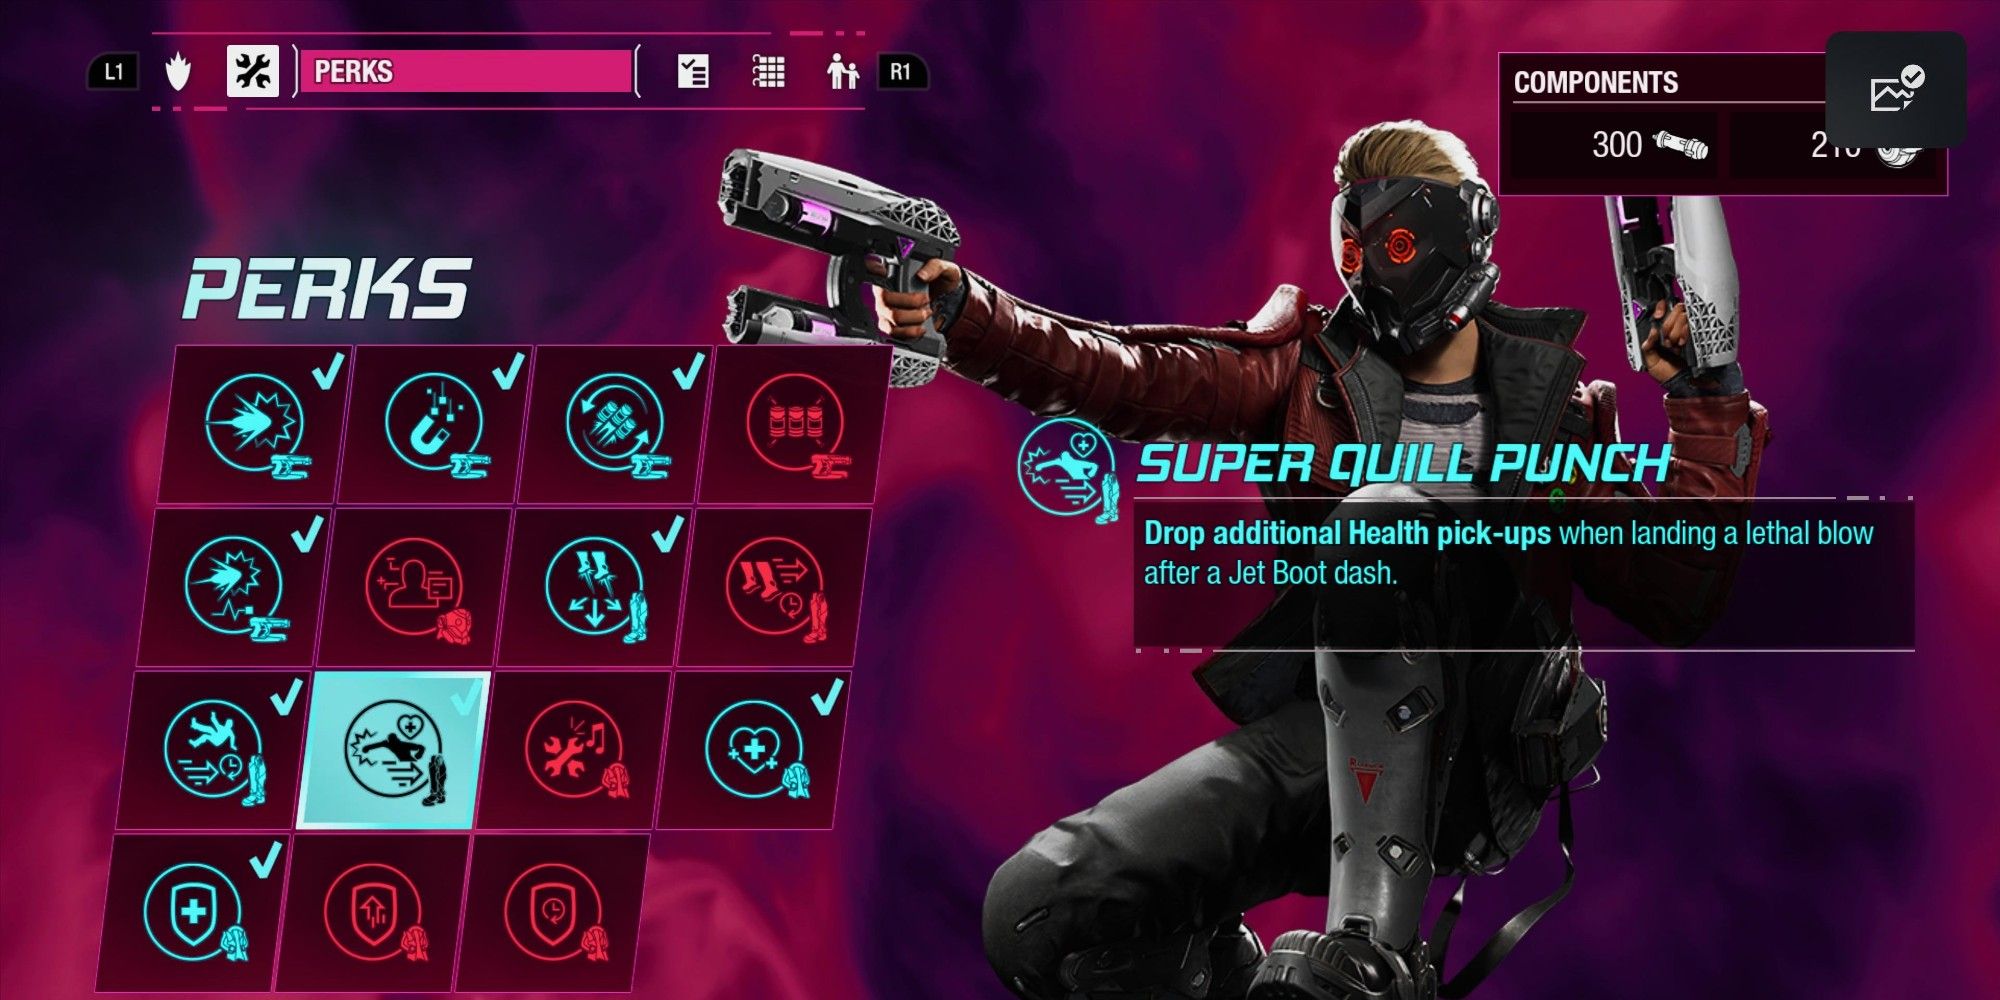 the super quill punch on the perks screen